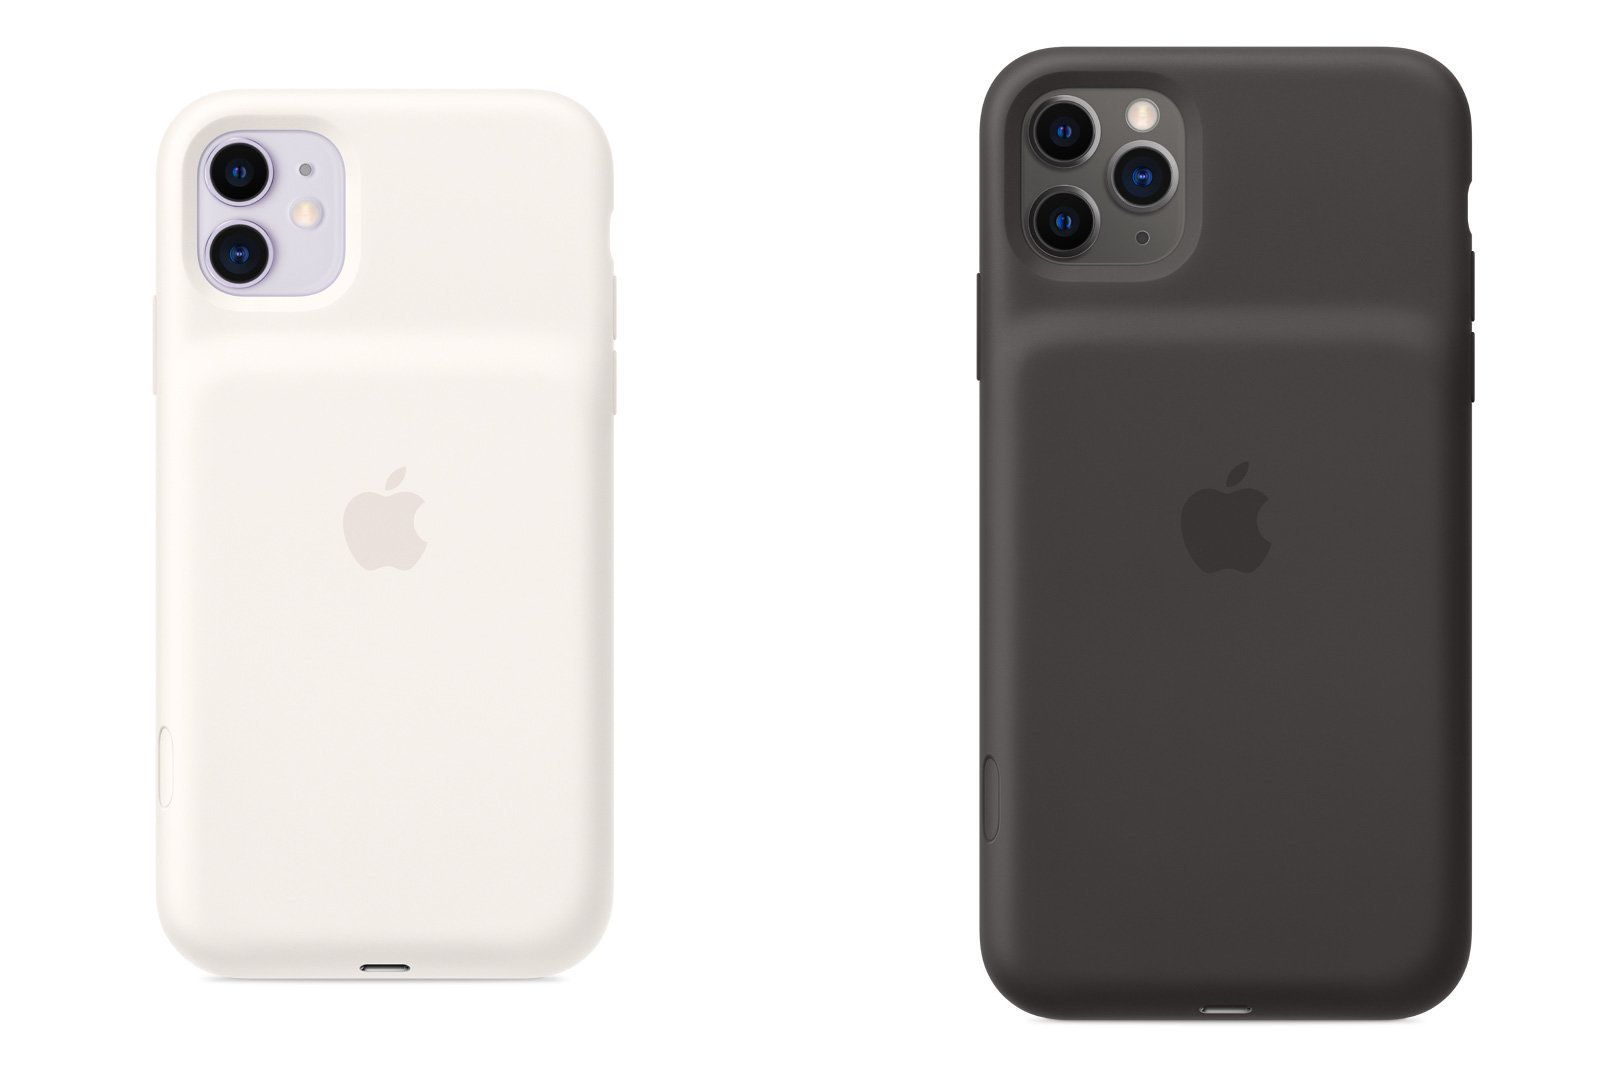 Apple's iPhone 11 Battery Case Includes a Dedicated Camera Button